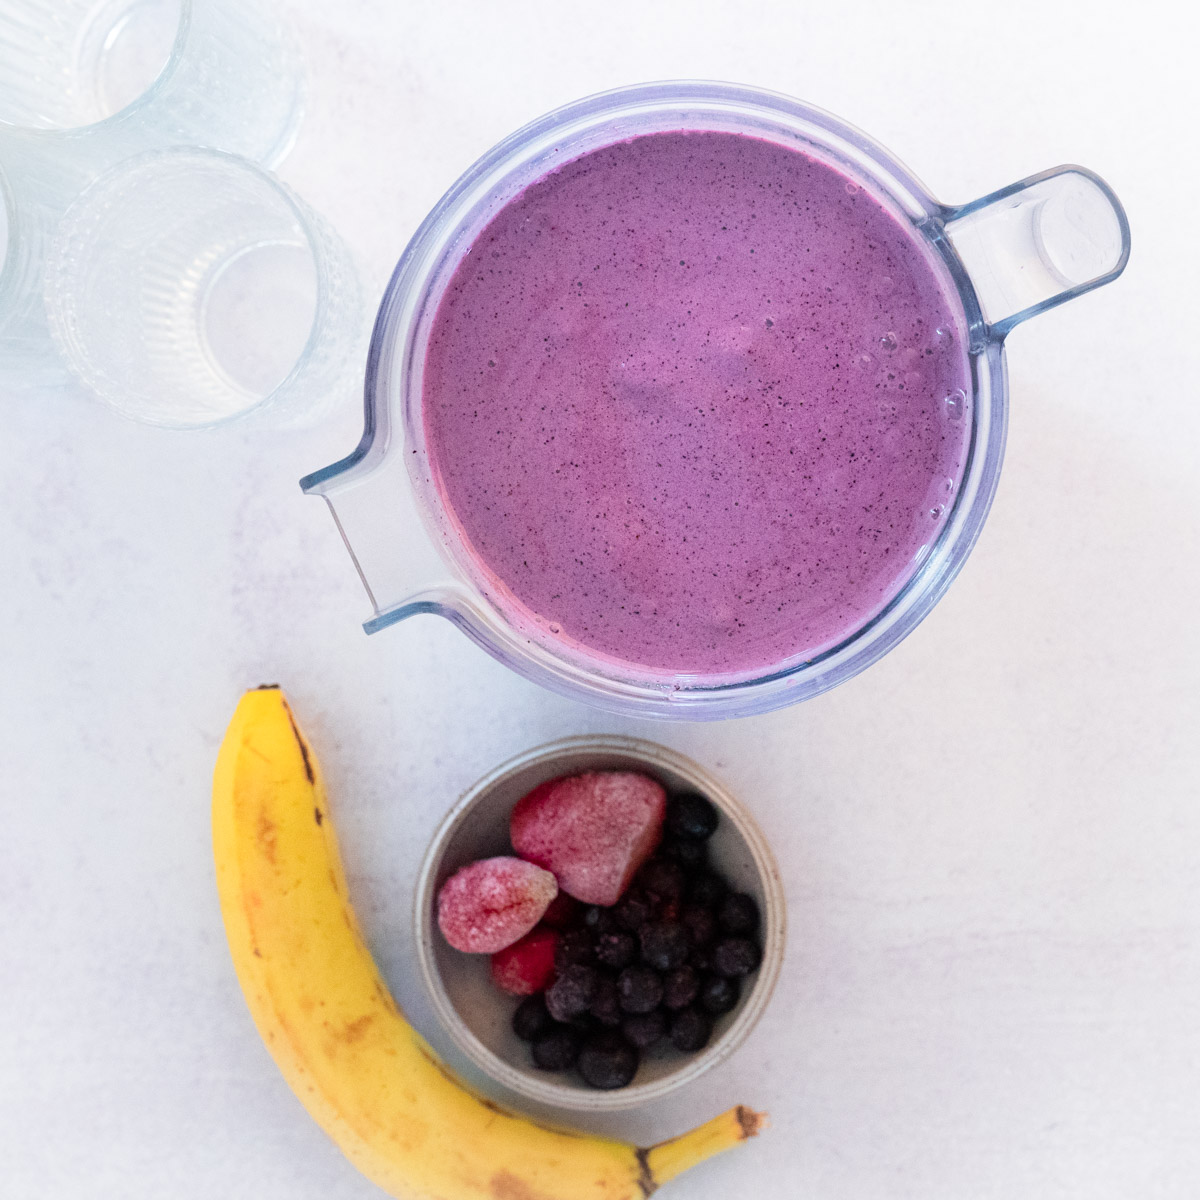 Top down Berry Blast smoothie in blender with ingredients in the shot. Seen is one ripe banana and a small bowl with berries. Decorative glasses are on the top left corner and the entire seen is on a cream background. 